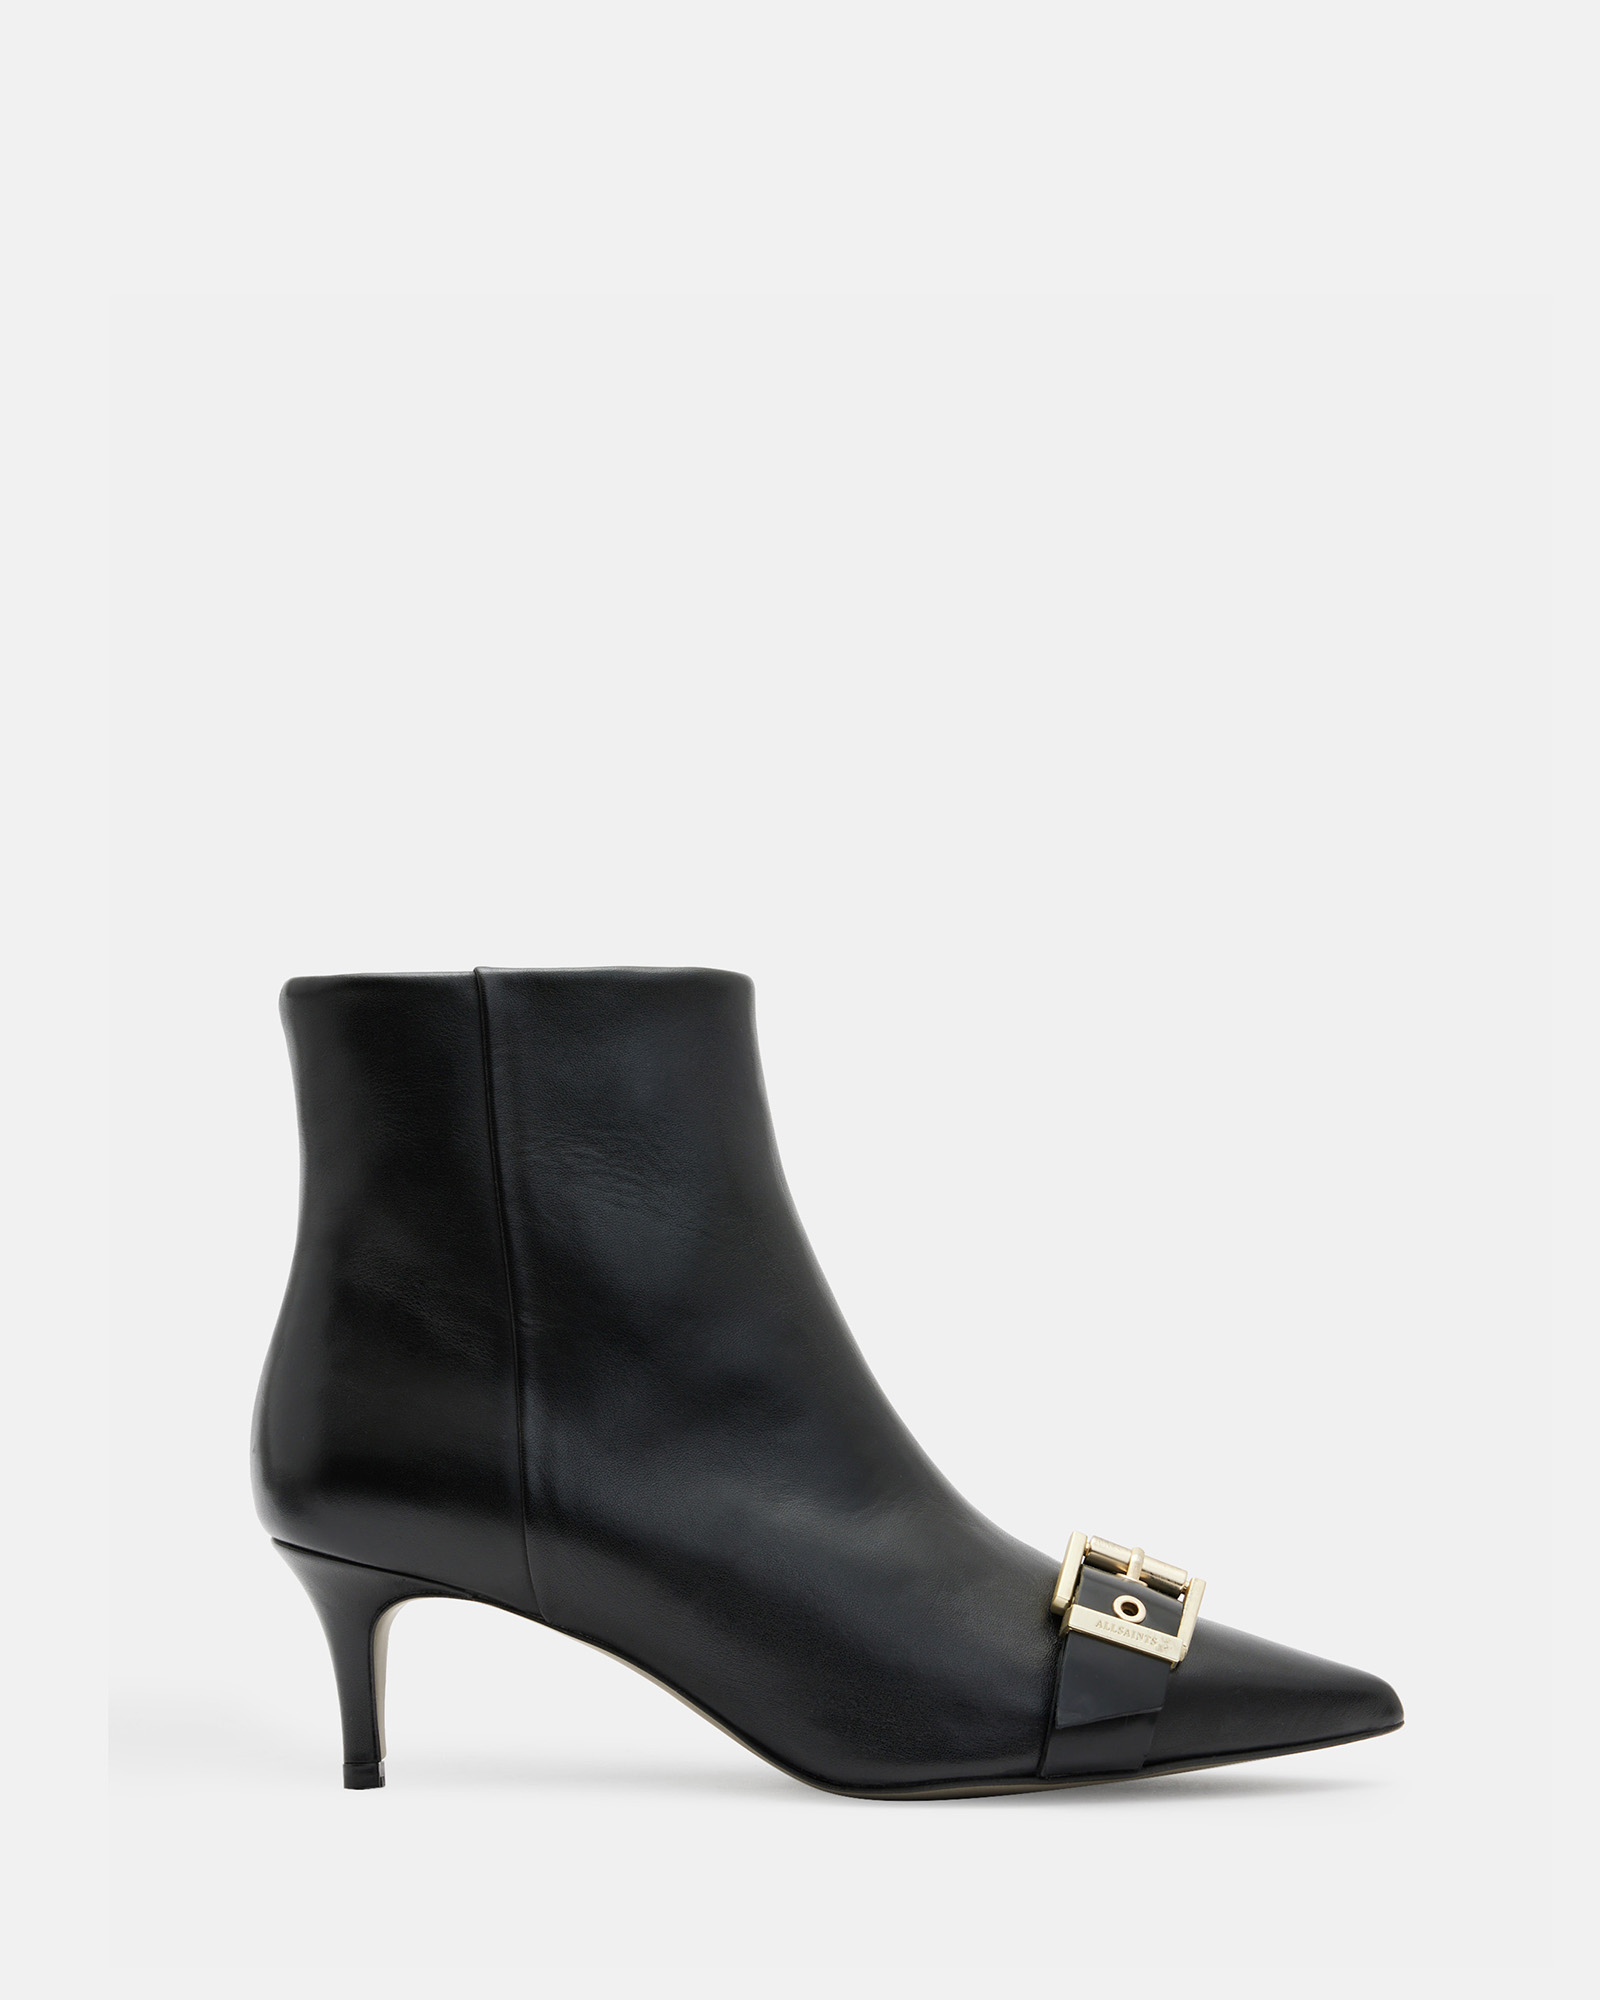 AllSaints Rebecca Pointed Toe Leather Buckle Boots